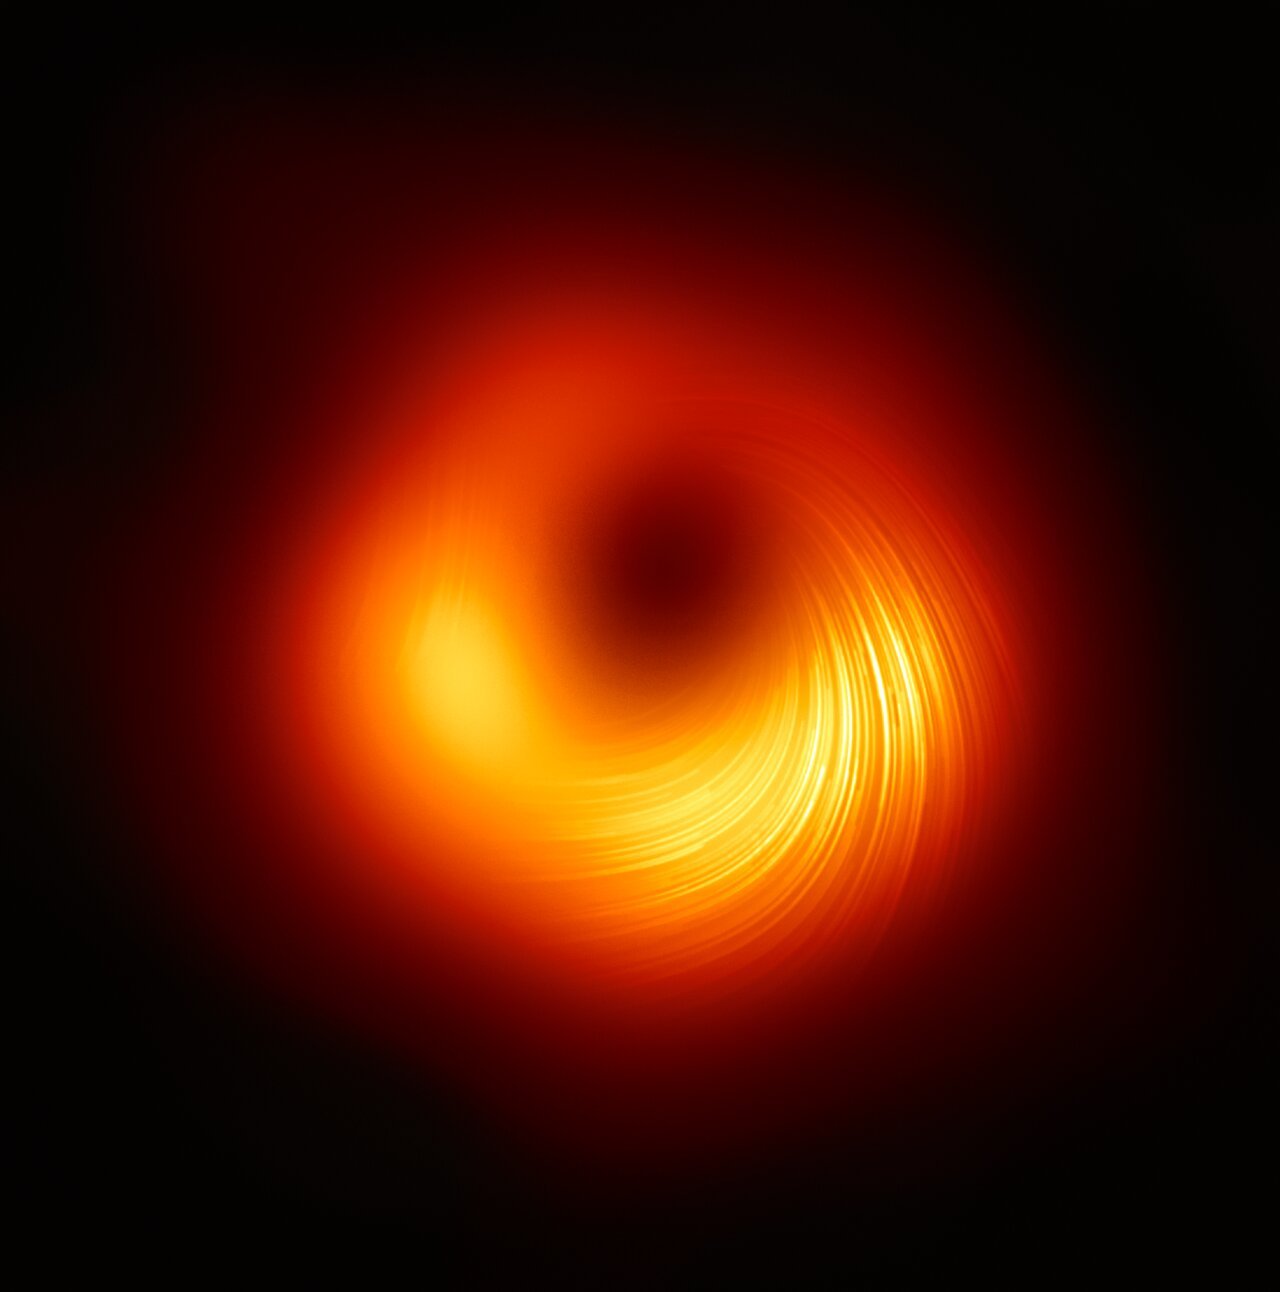 Black hole at the center of galaxy M87.